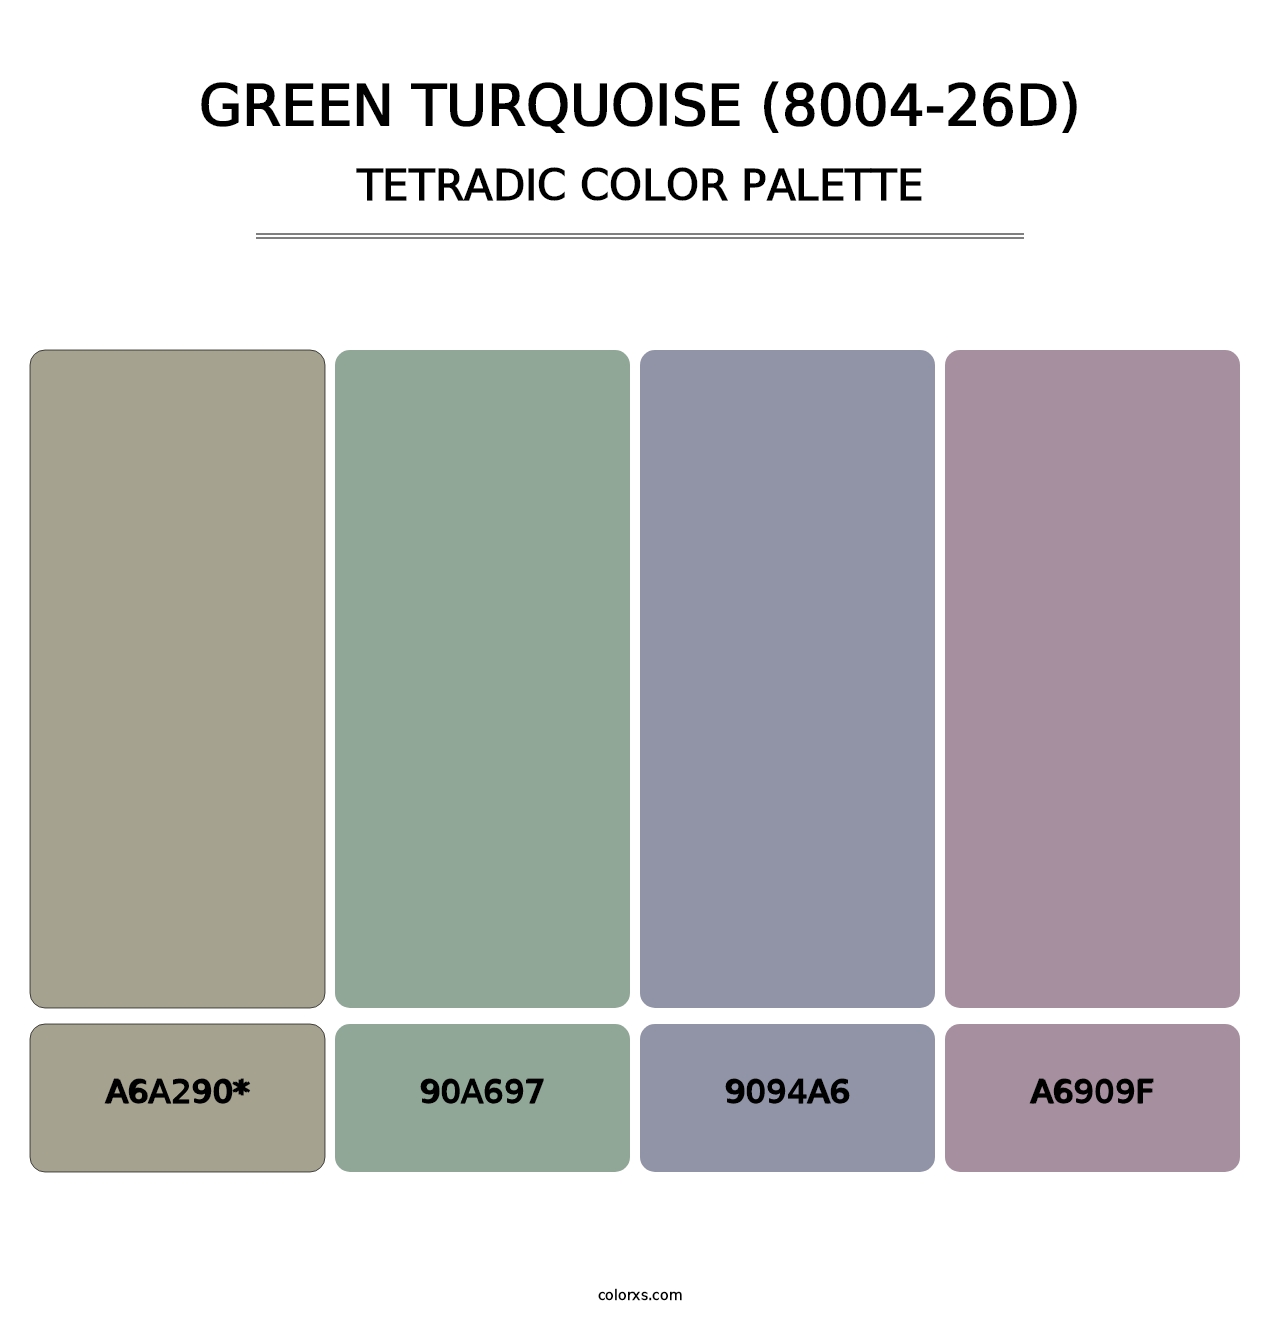 Green Turquoise (8004-26D) - Tetradic Color Palette